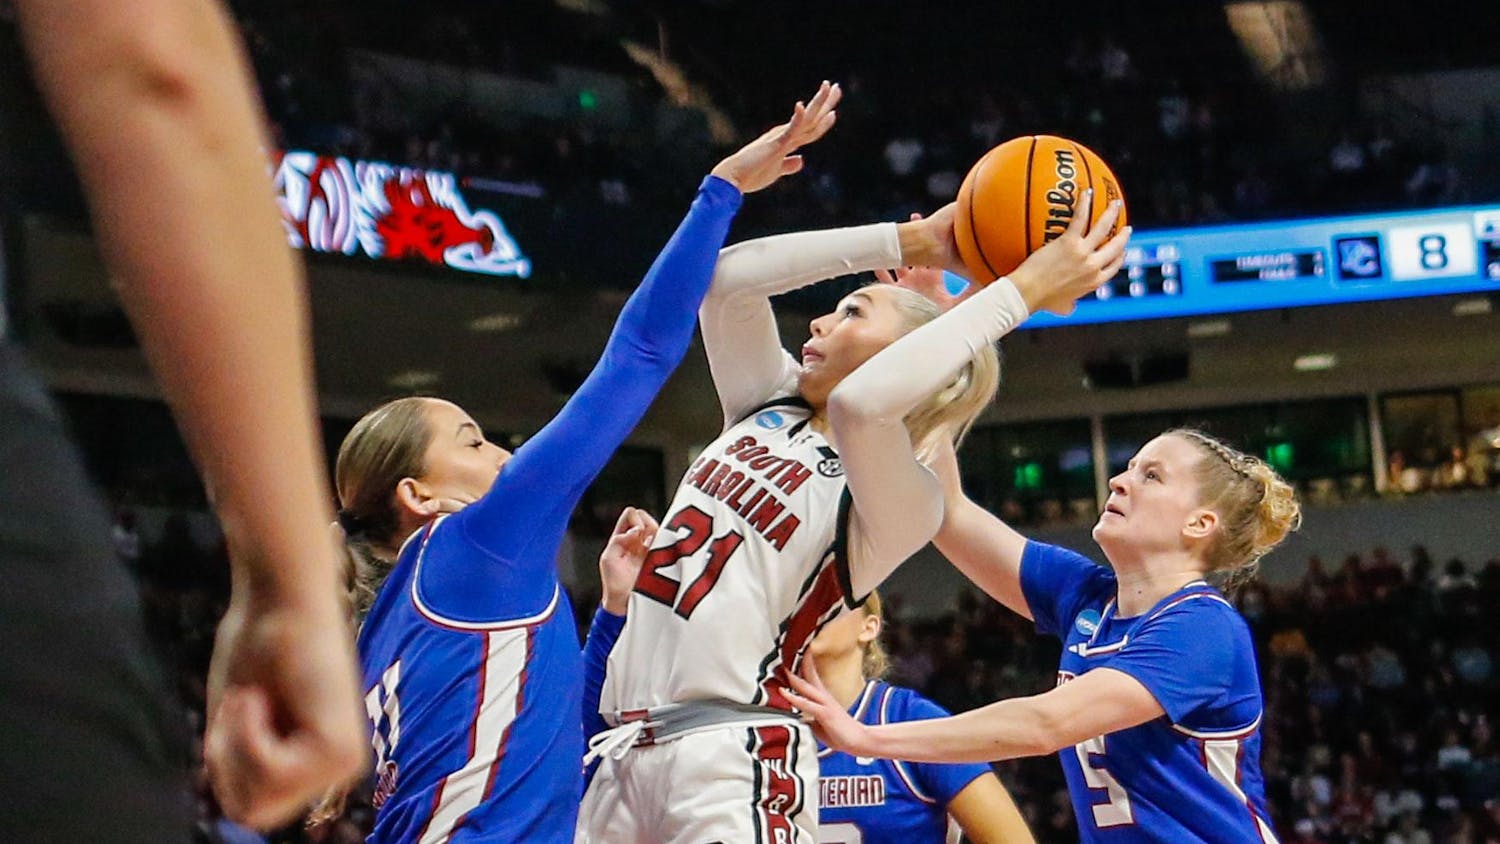 Sophomore forward Chloe Kitts goes up for a shot during South Carolina’s game against Presbyterian in round one of the 2024 NCAA Women’s Tournament on March 22, 2024. Kitts led the team in scoring with 21 points in the Gamecocks’ 91-39 victory over the Blue Hose.